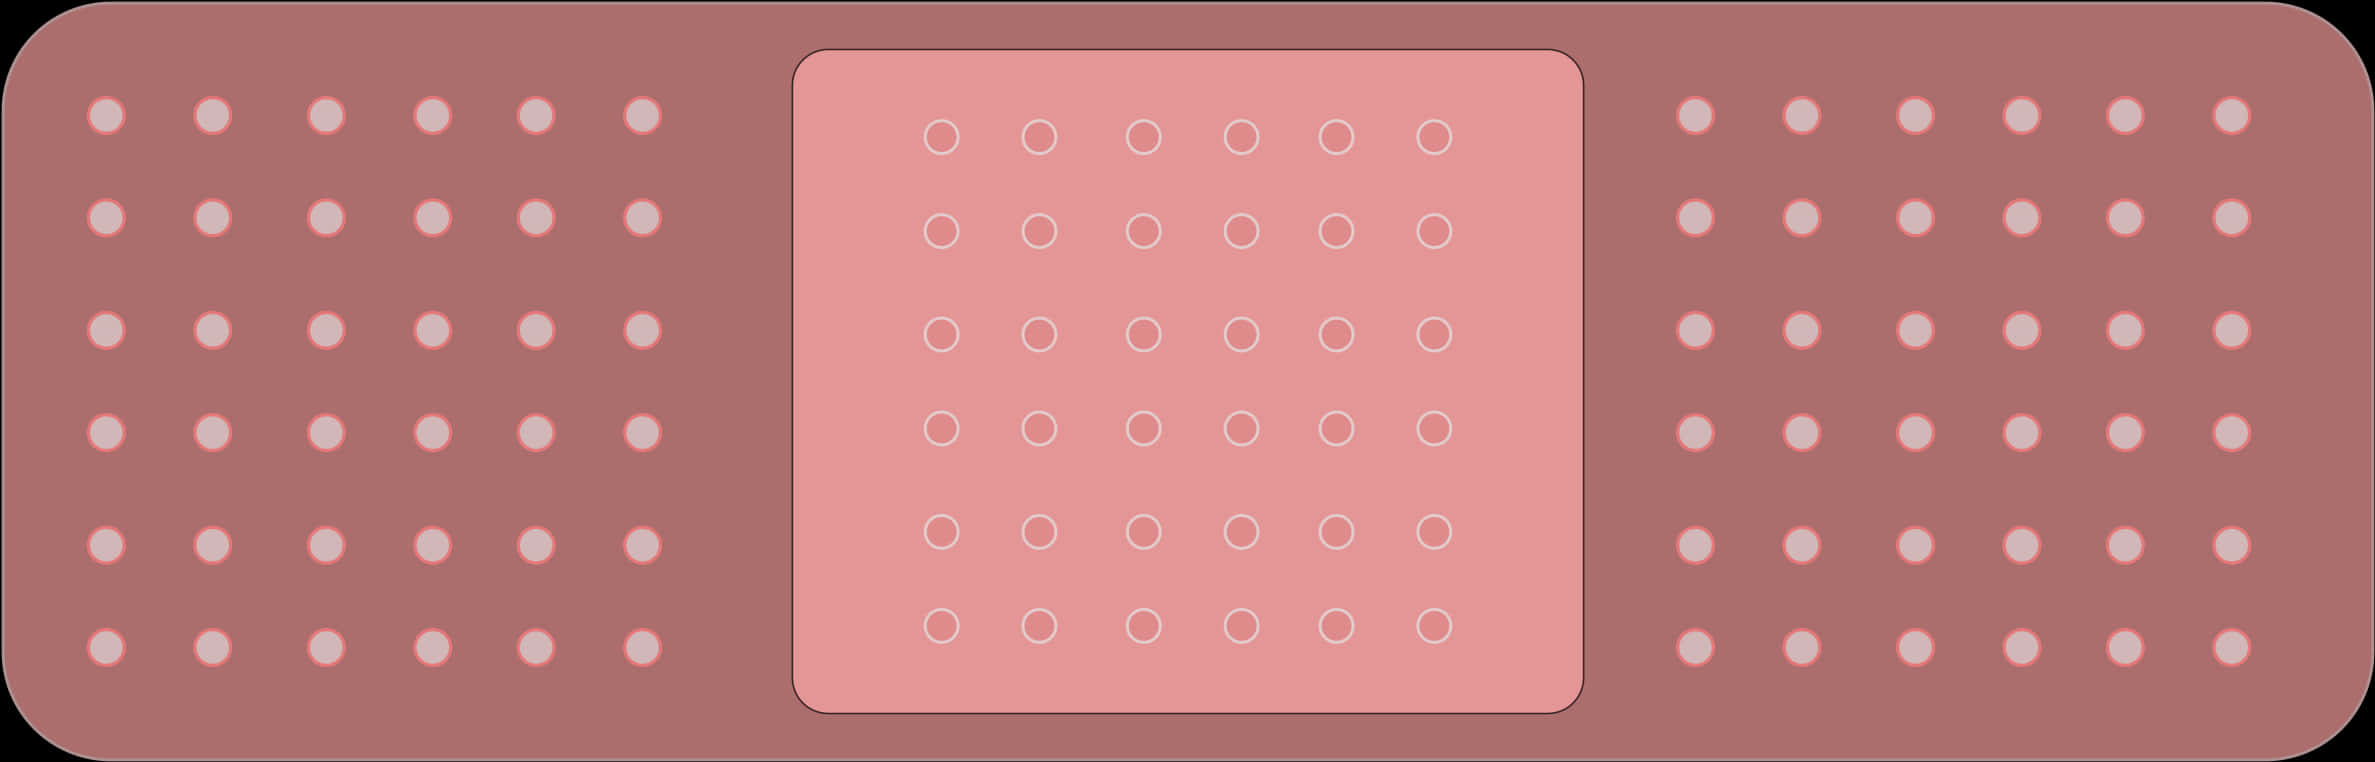 A Pink Square With White Circles